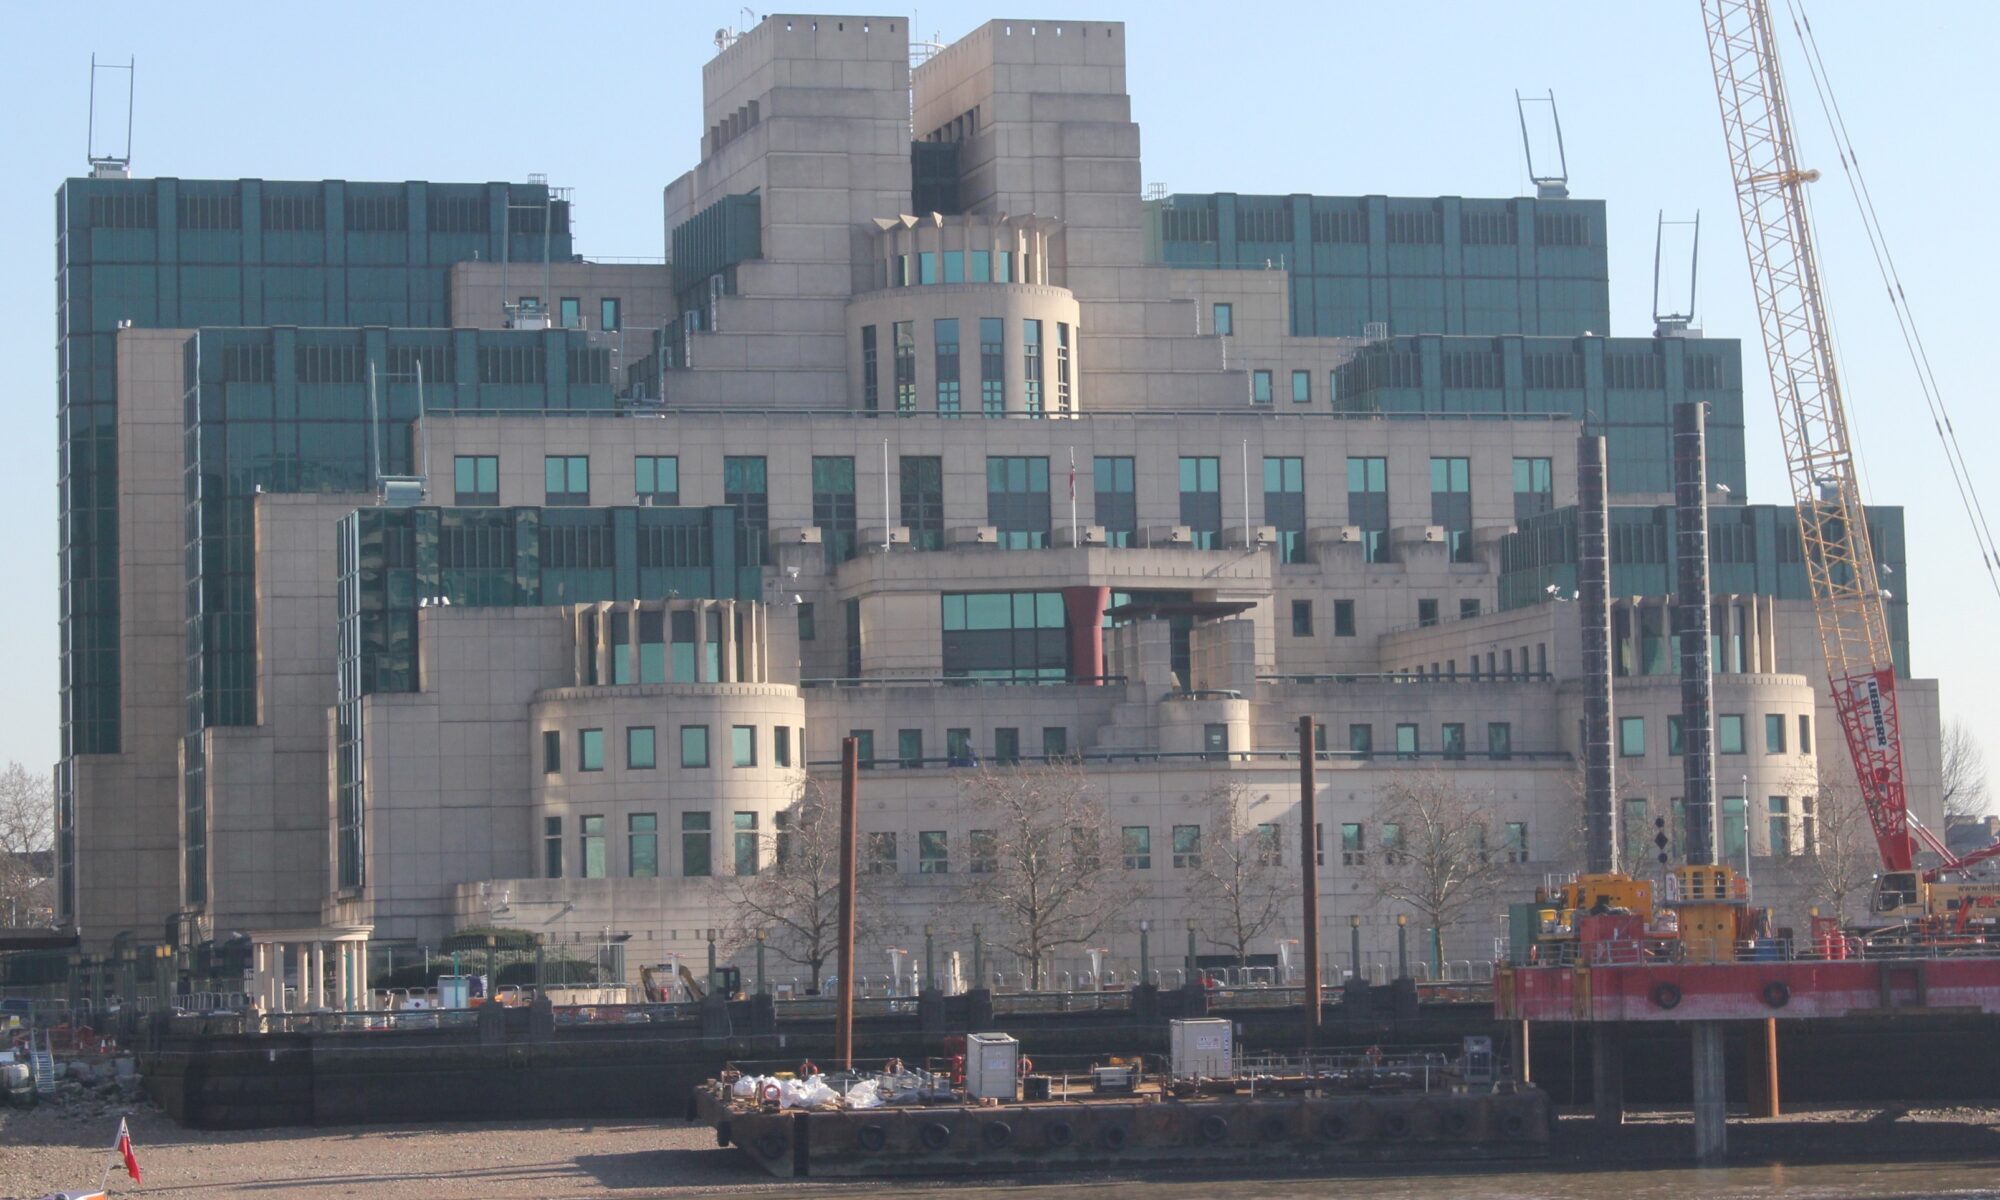 MI6 Headquaters in London as seen from the Milbank